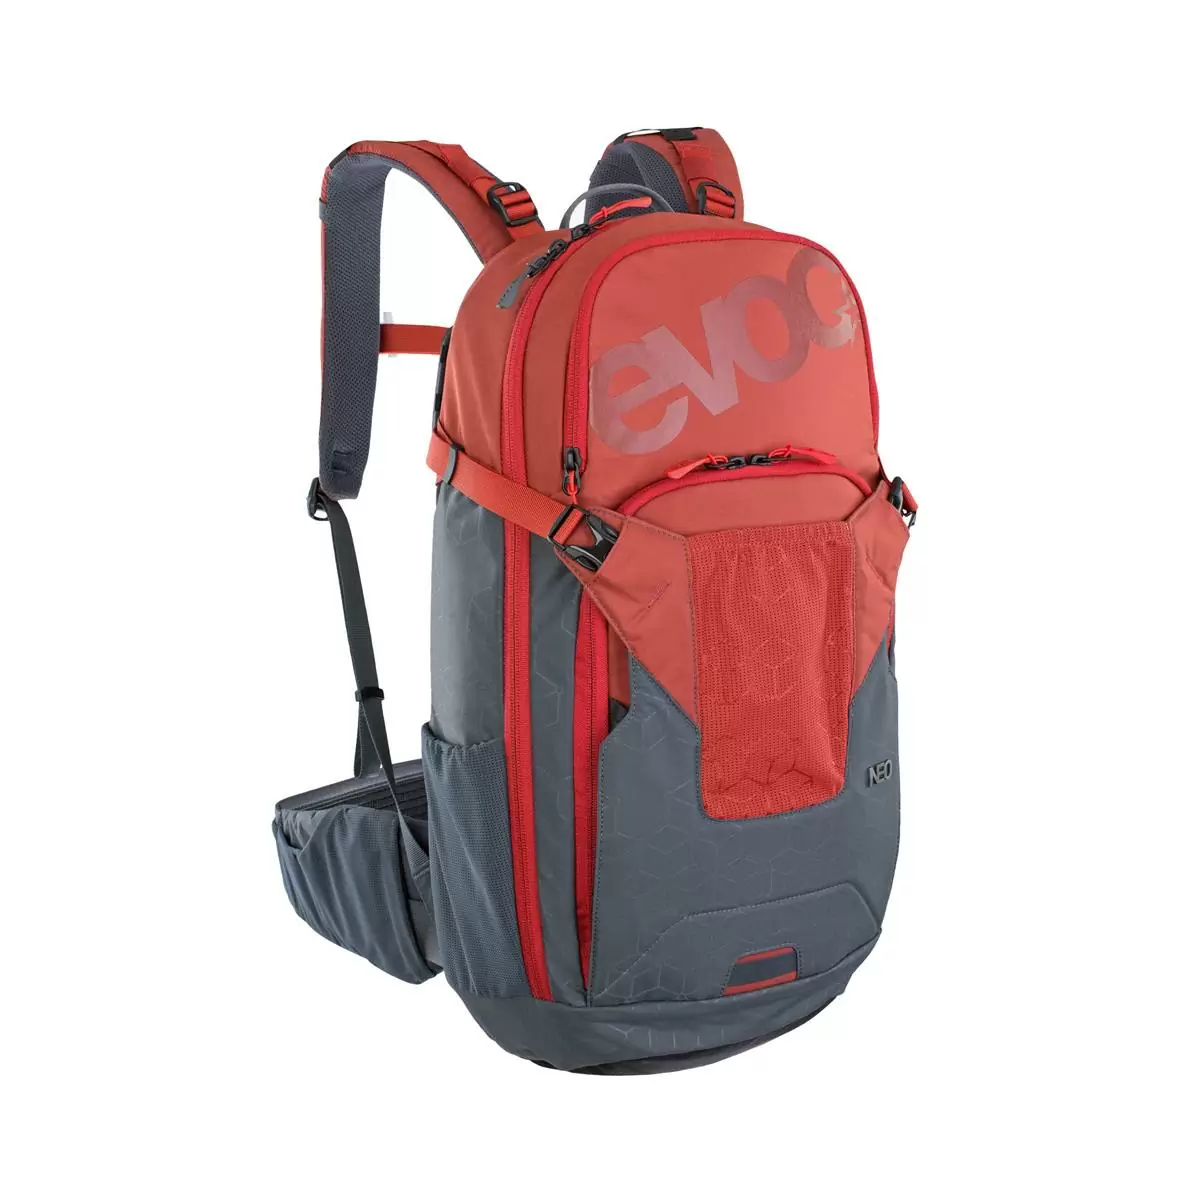 Backpack Neo 16L Grey/Red S/M - image